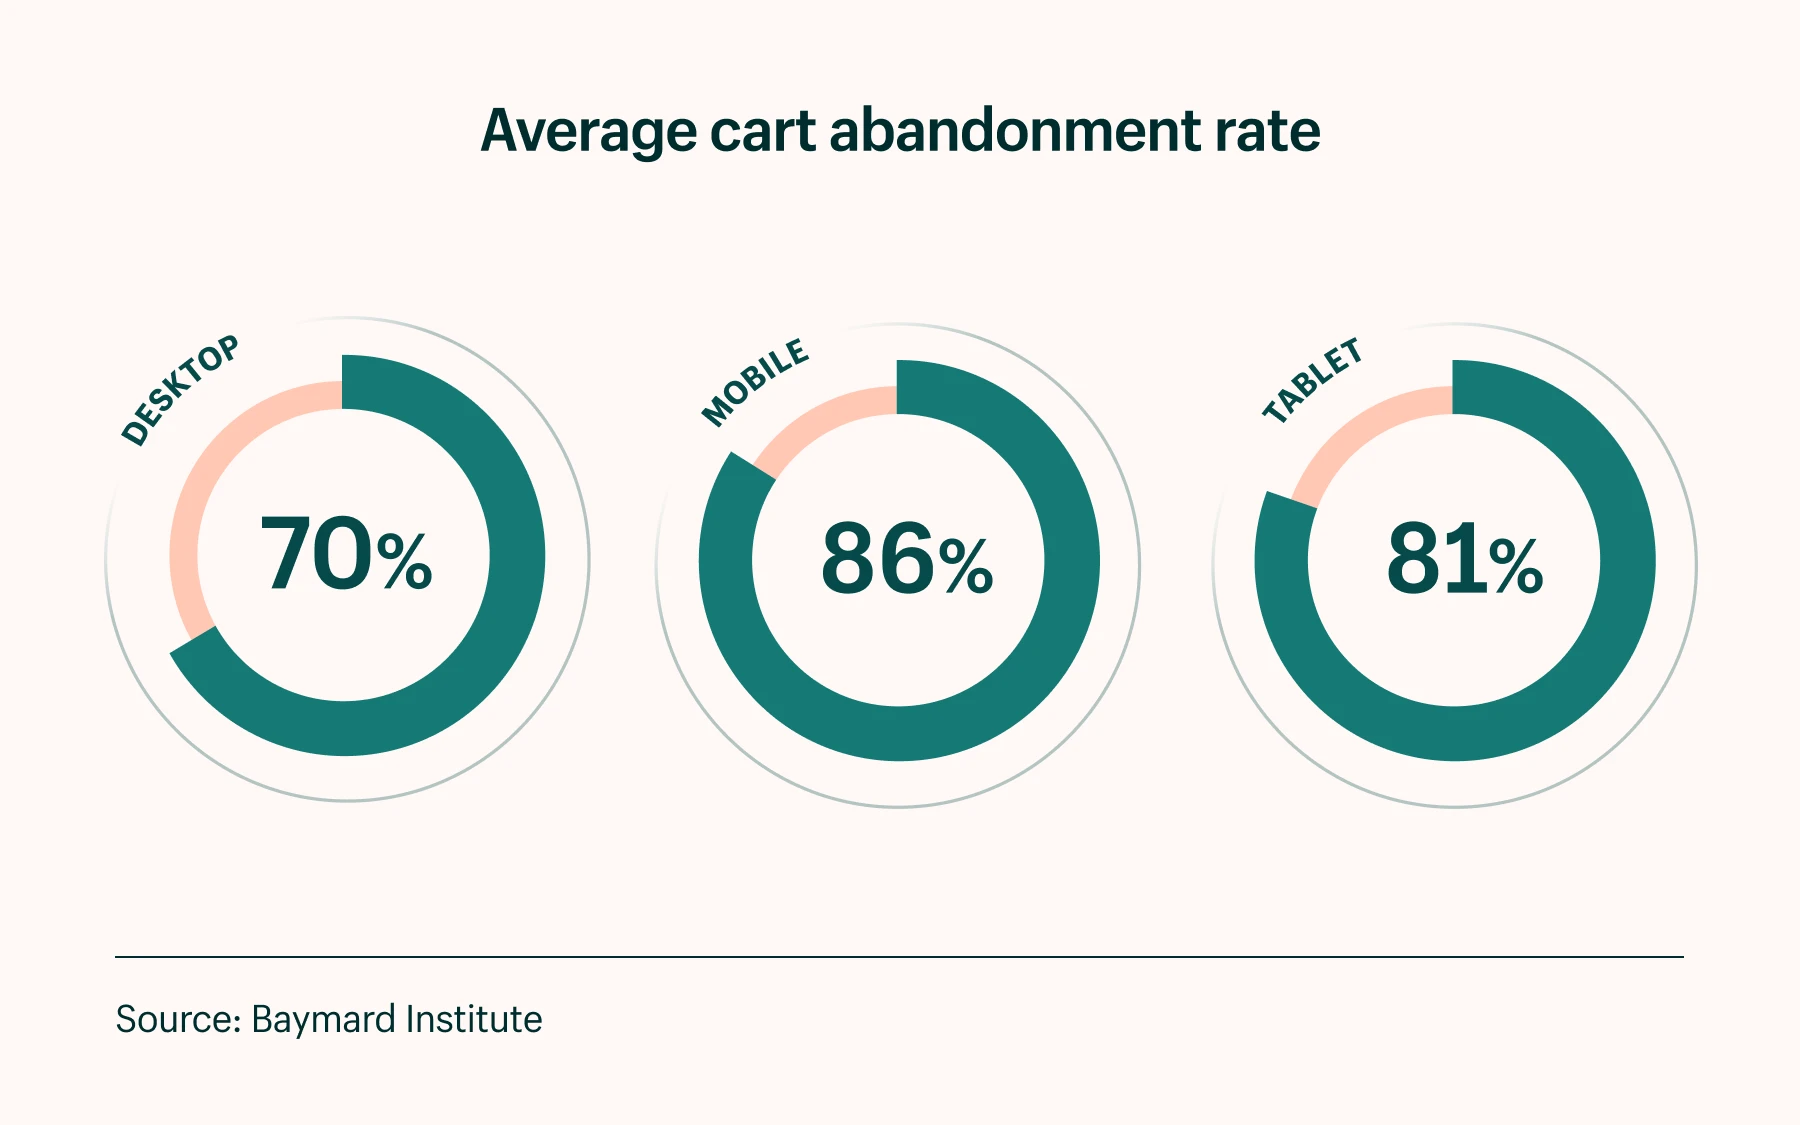 Shopping cart abandonment rates by device